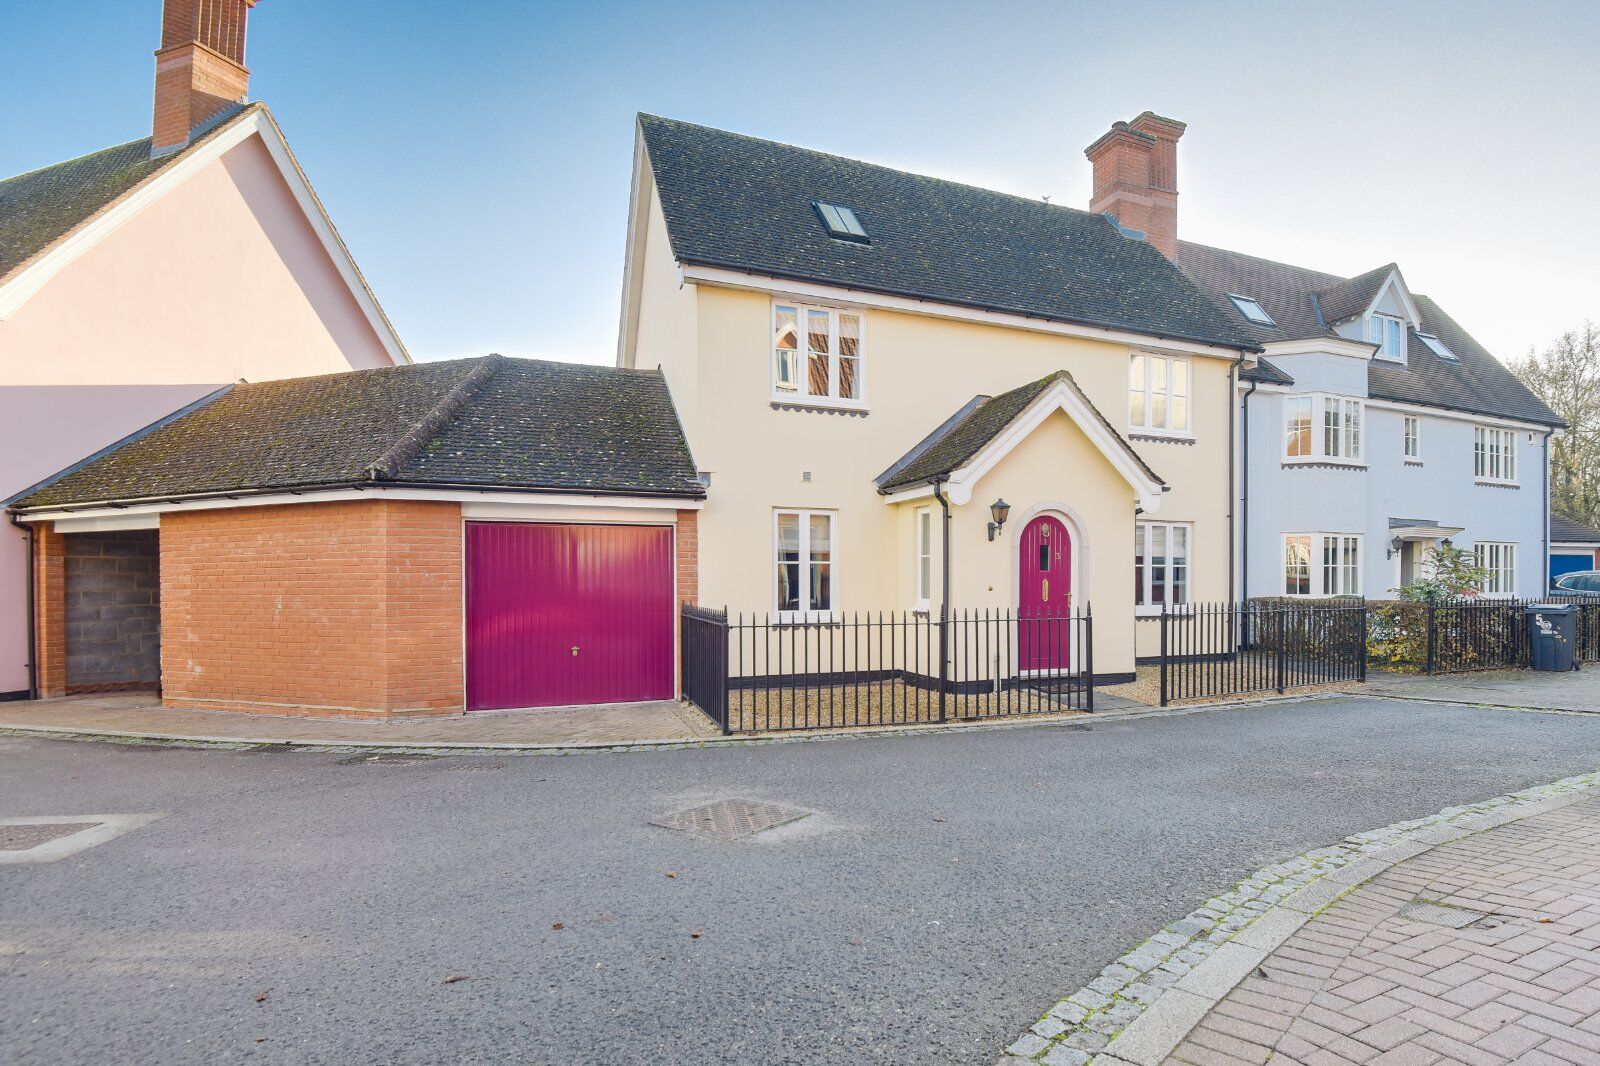 4 bedroom detached house for sale Armourers Close, CM23, main image